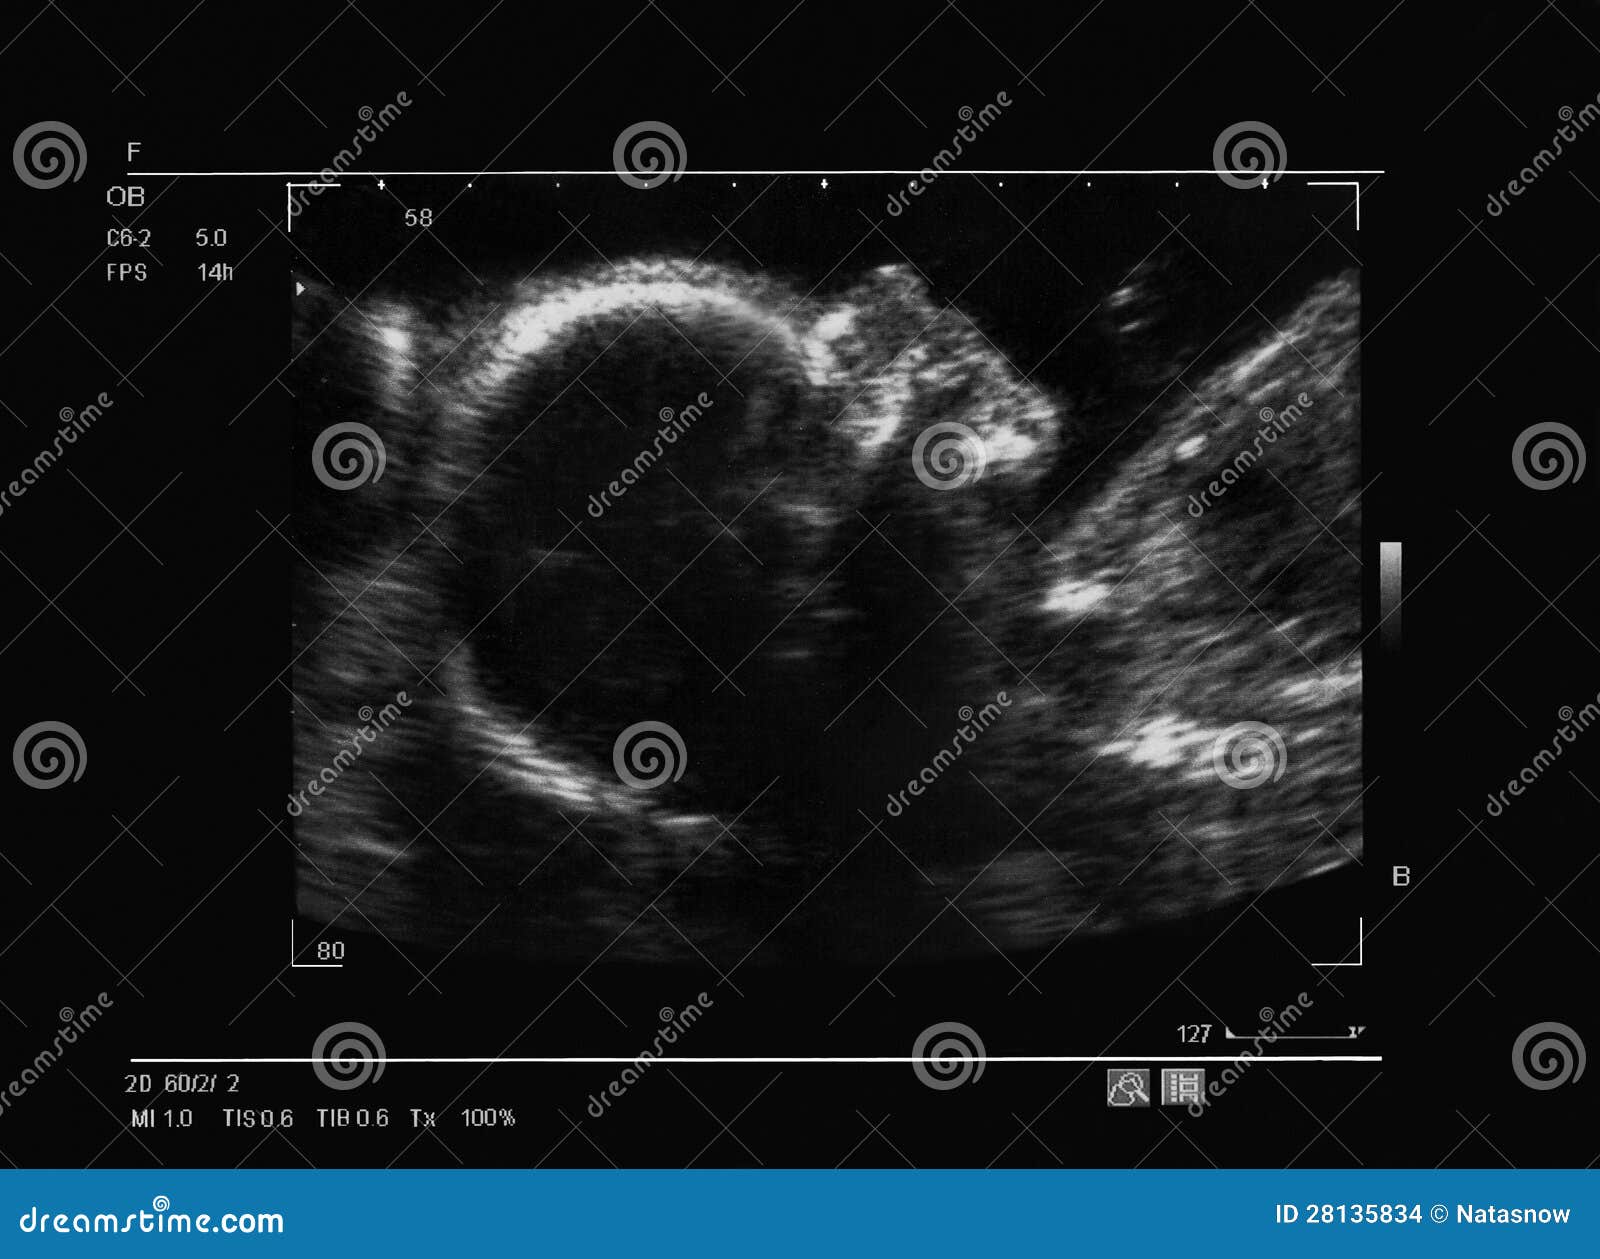 Ultrasound of a Fetus at 26 Stock Photo - Image of uterus, ultrasound: 28135834